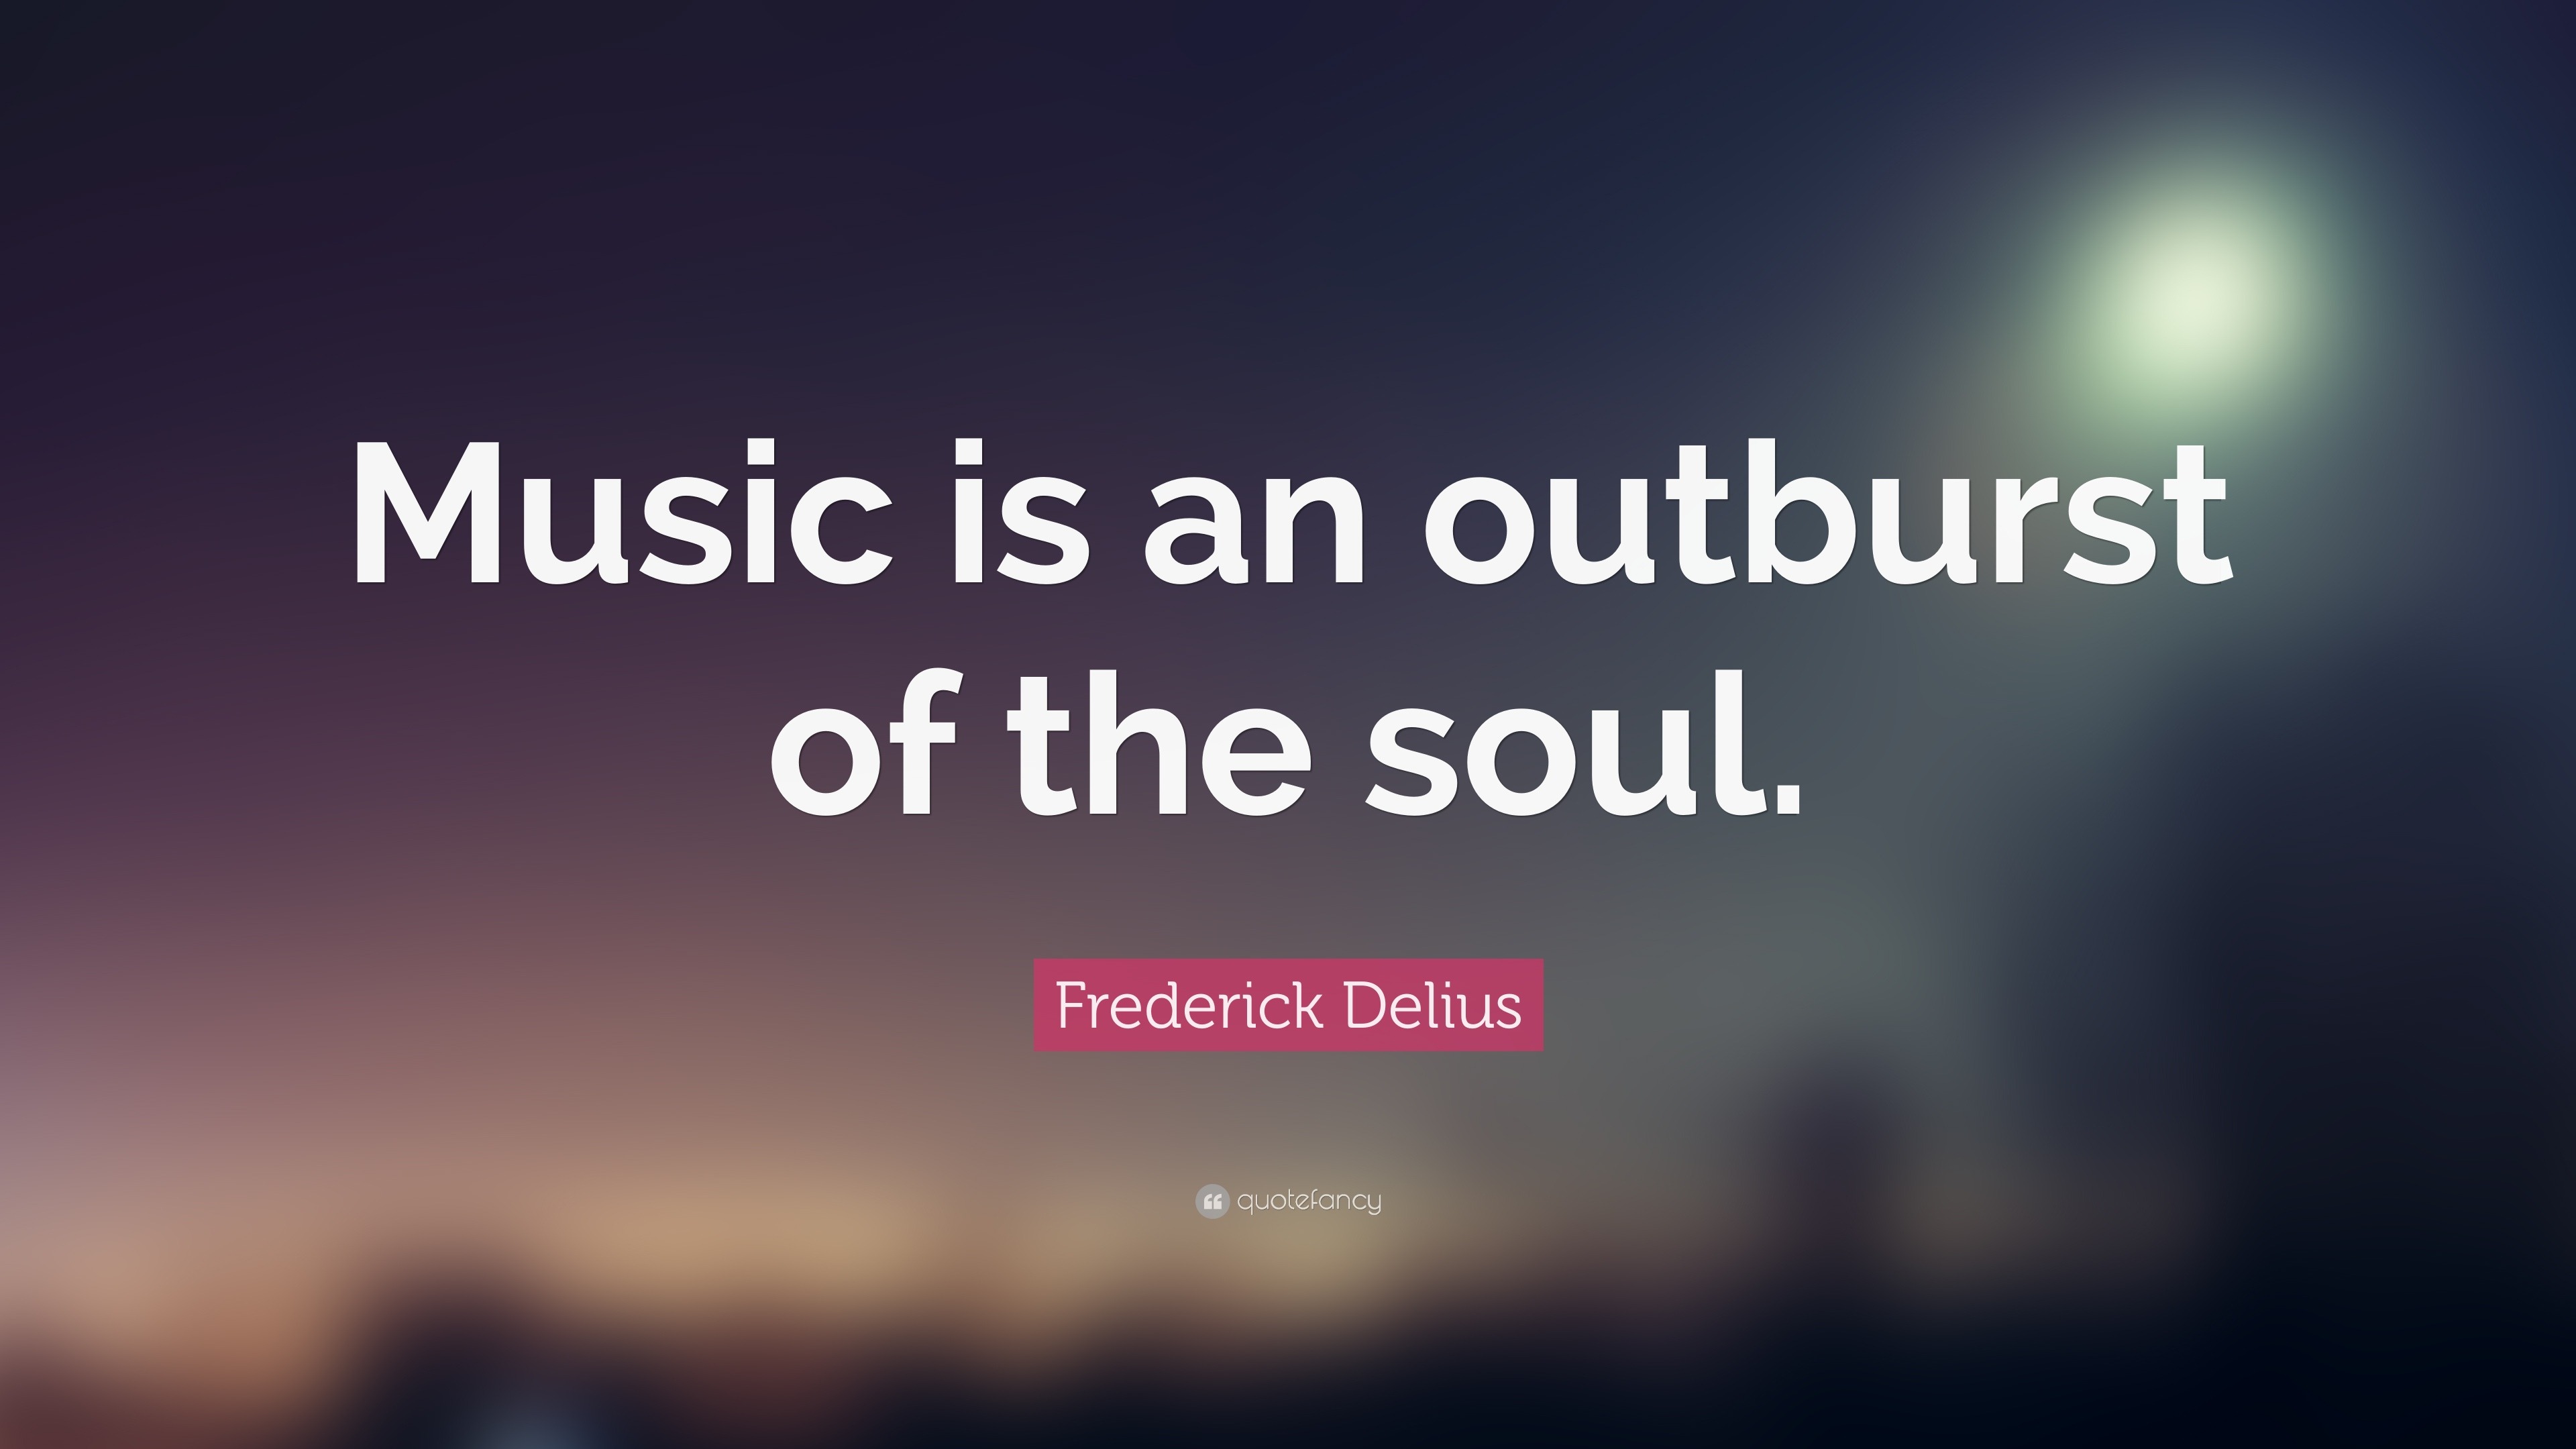 Frederick Delius Quote: “Music is an outburst of the soul.”